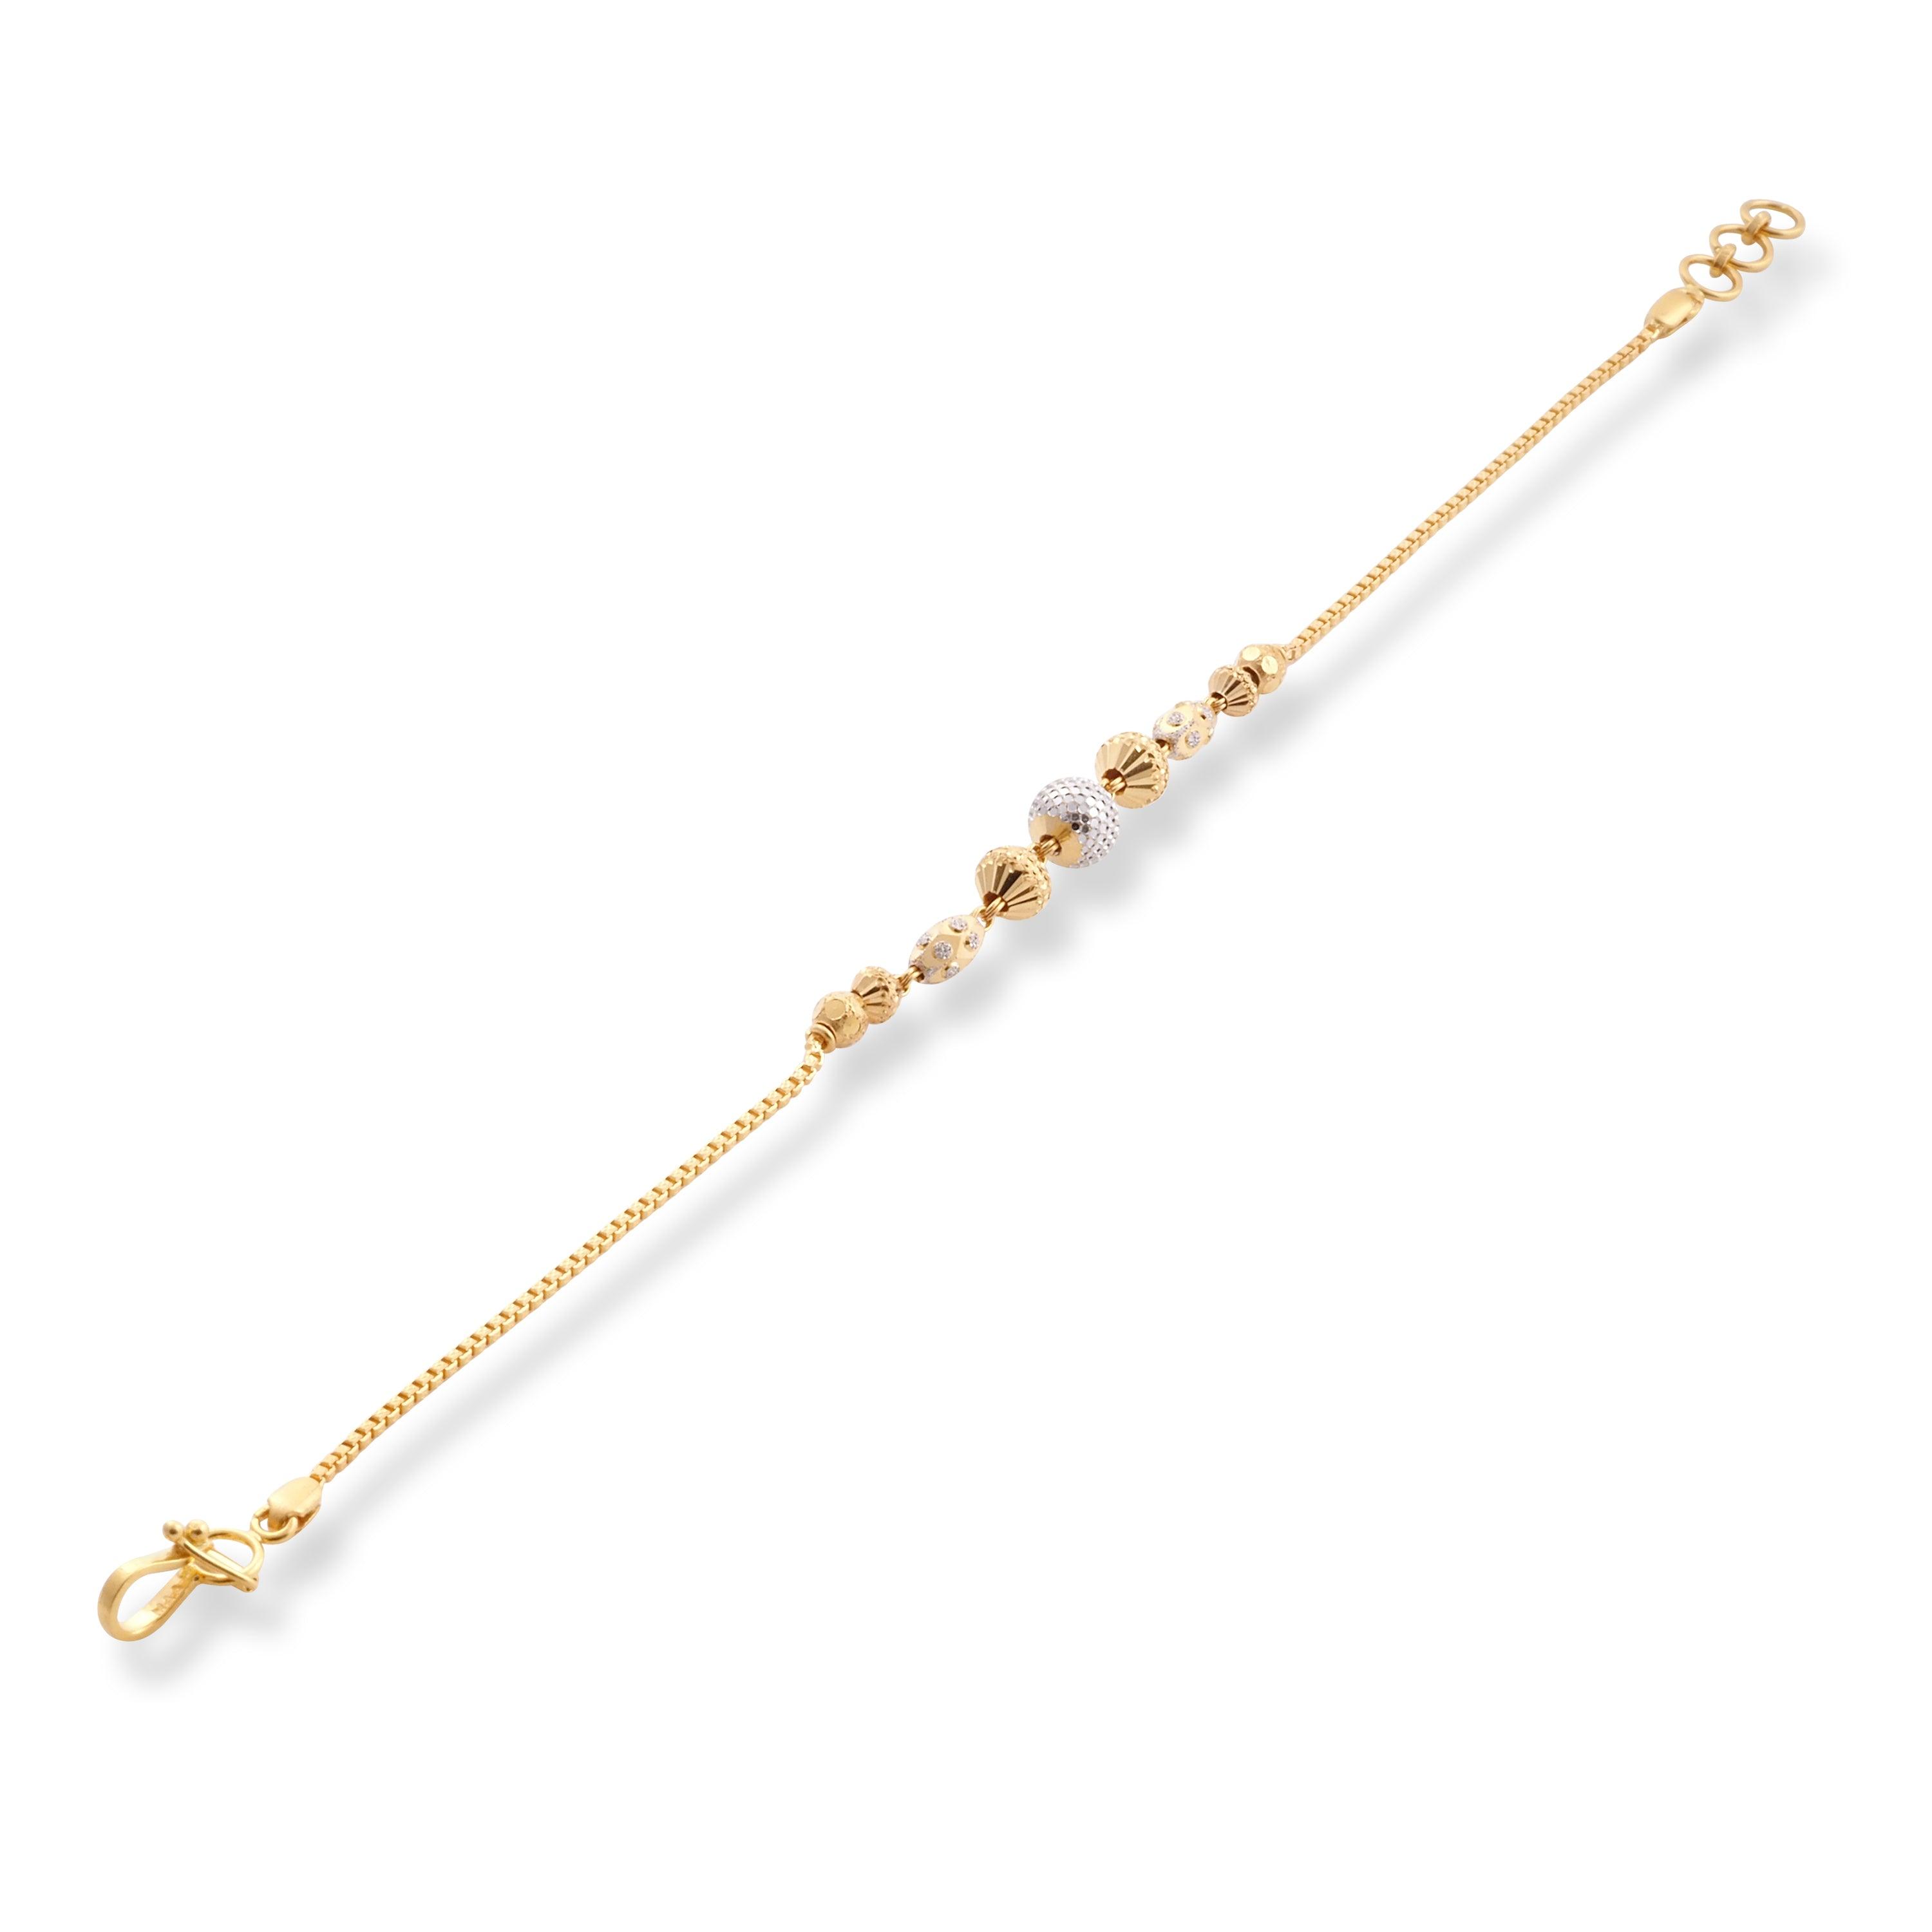 22ct Yellow Gold Bracelet in Rhodium Plating Beads with Hook Clasp LBR-8505 - Minar Jewellers